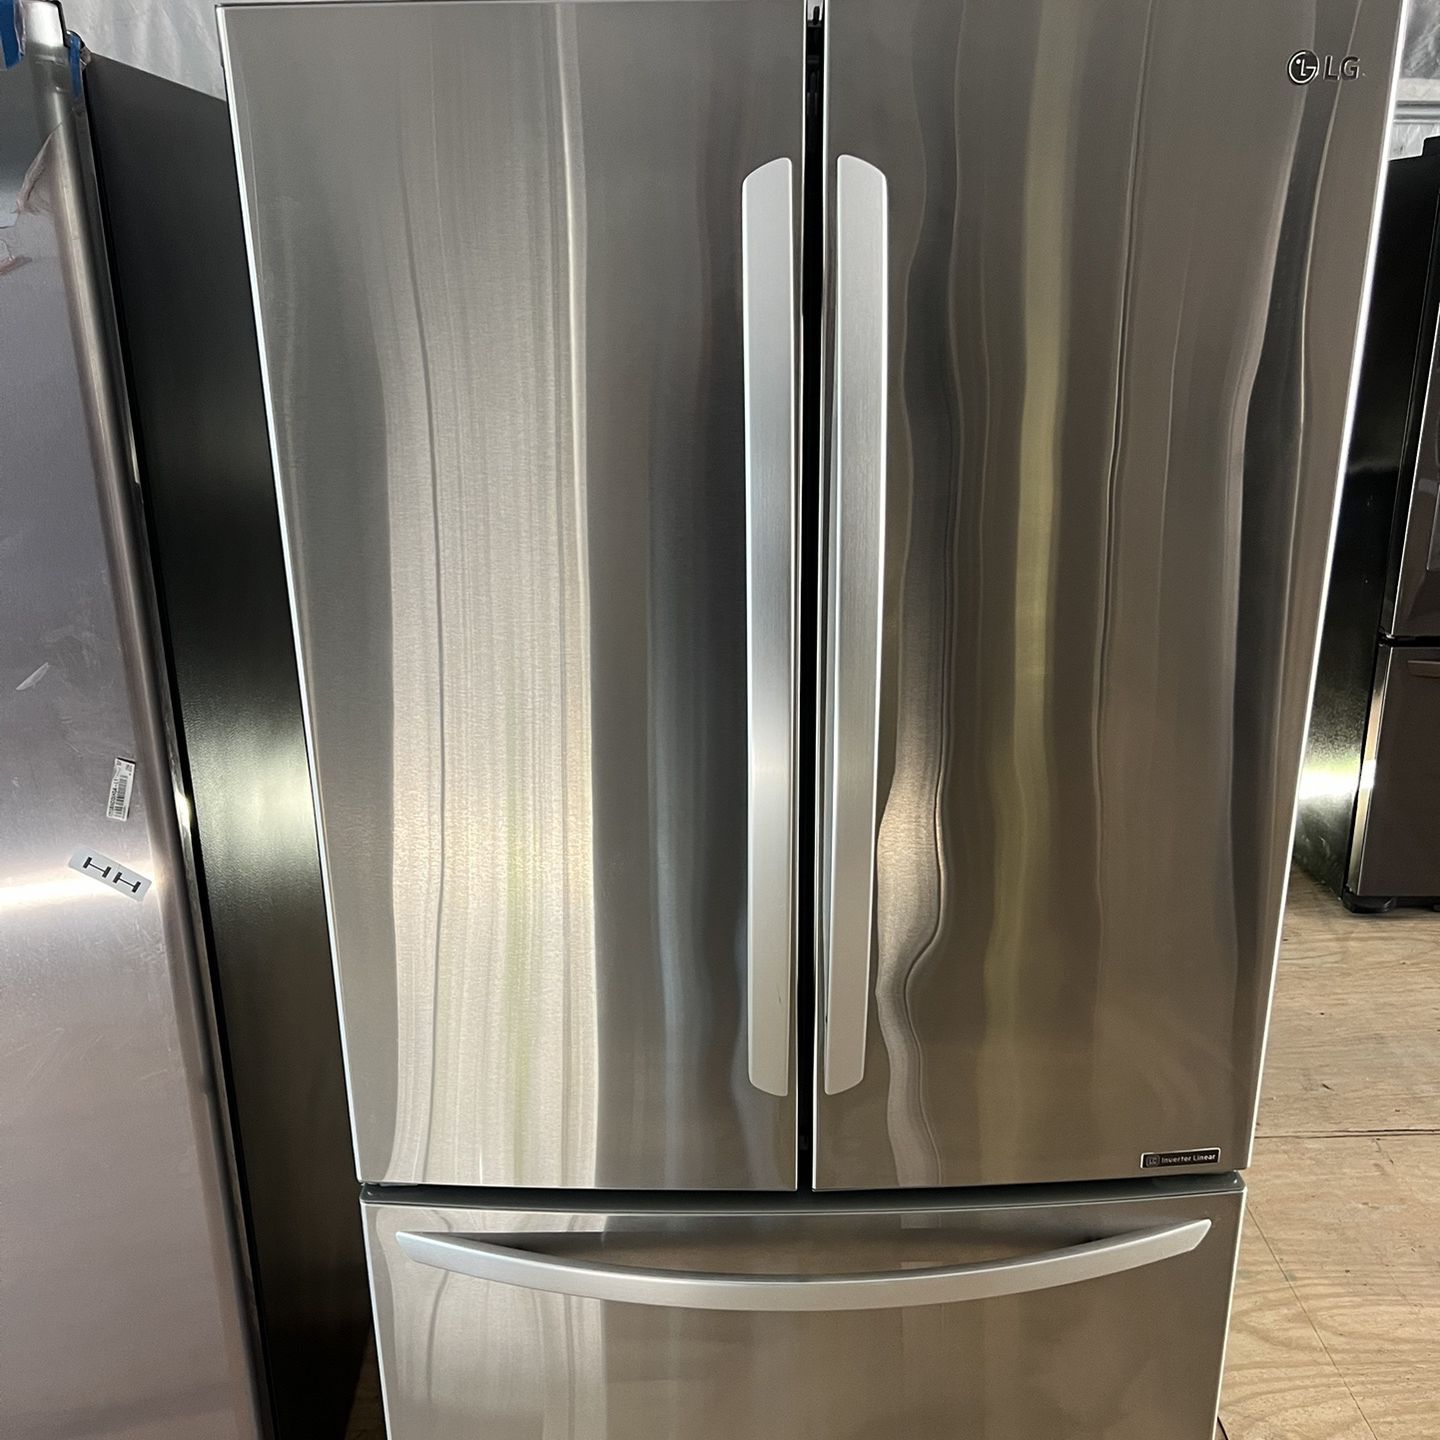 LG French door Refrigerator   60 day warranty/ Located at:📍5415 Carmack Rd Tampa Fl 33610📍 